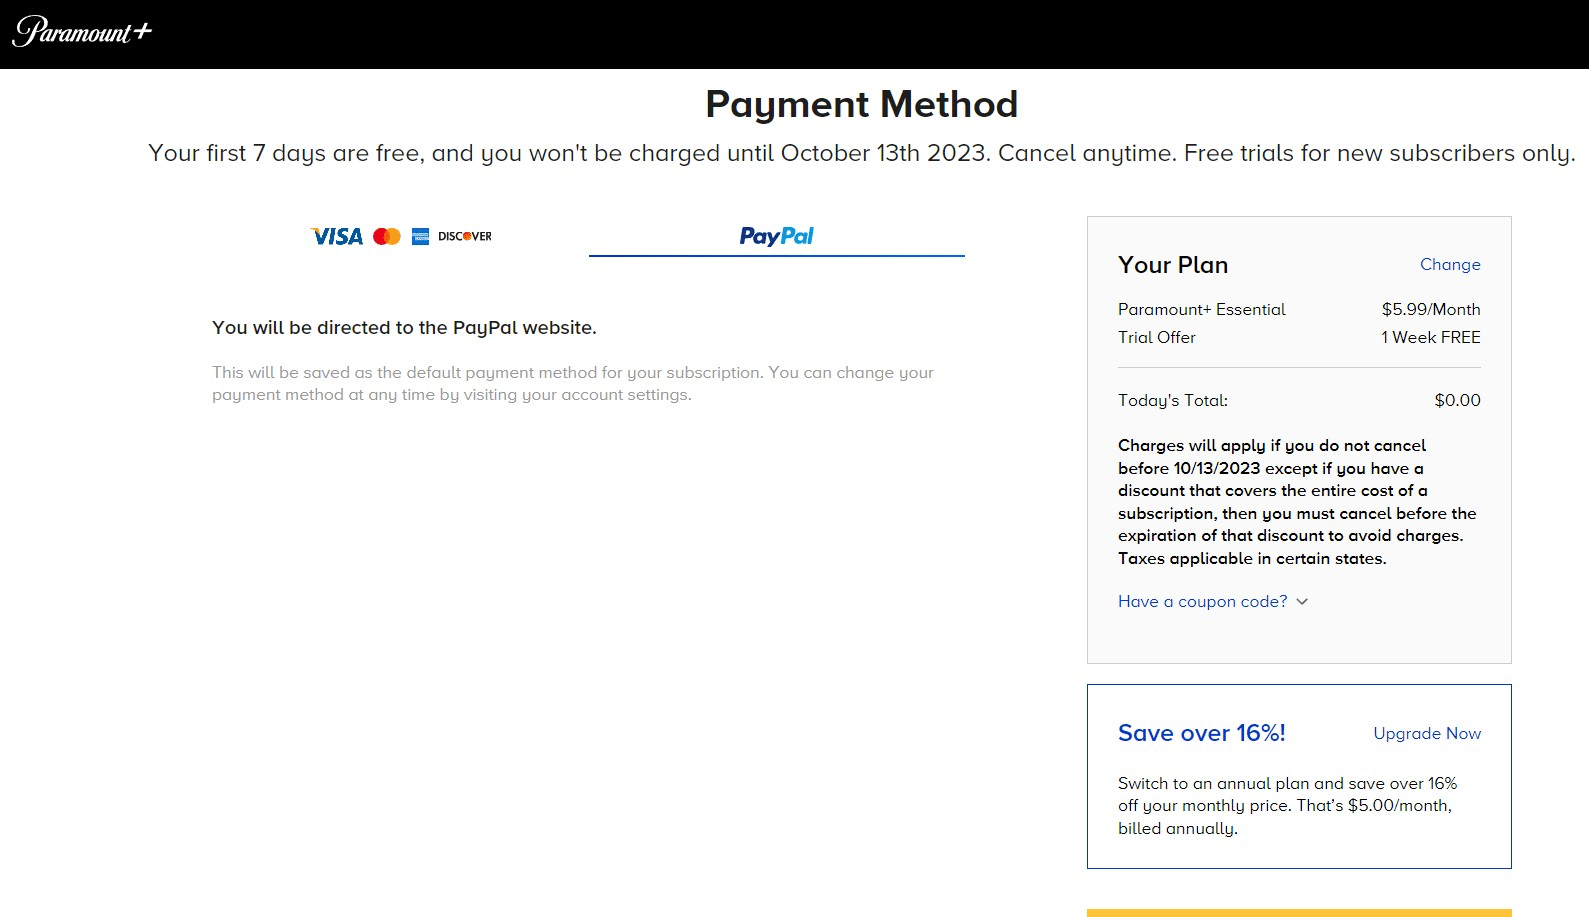 PayPal as payment method on paramount+ site